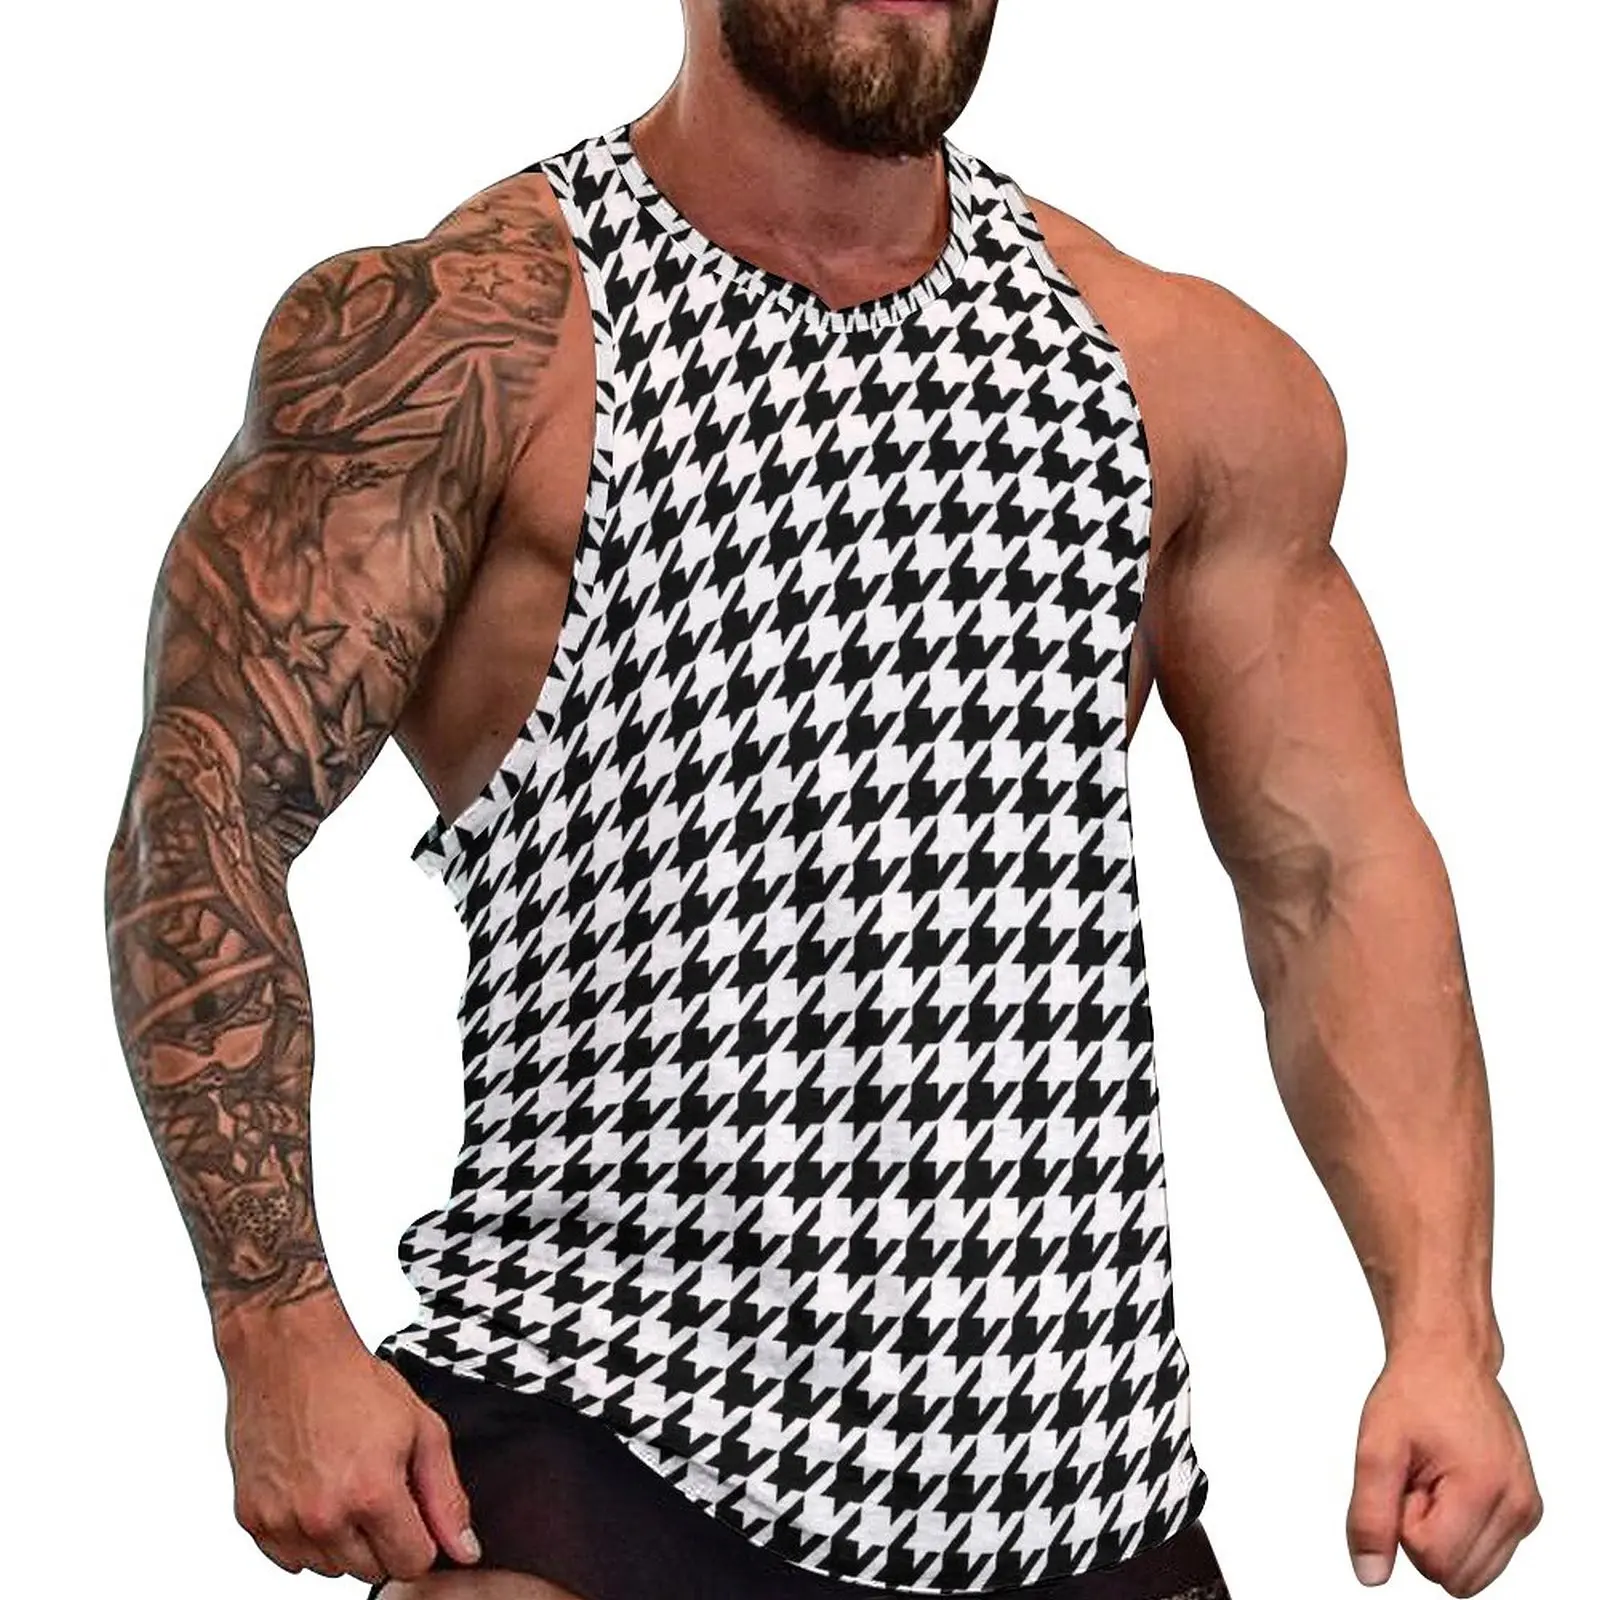 

Cool Houndstooth Daily Tank Top Checkered Print Bodybuilding Tops Males Printed Fashion Sleeveless Vests Plus Size